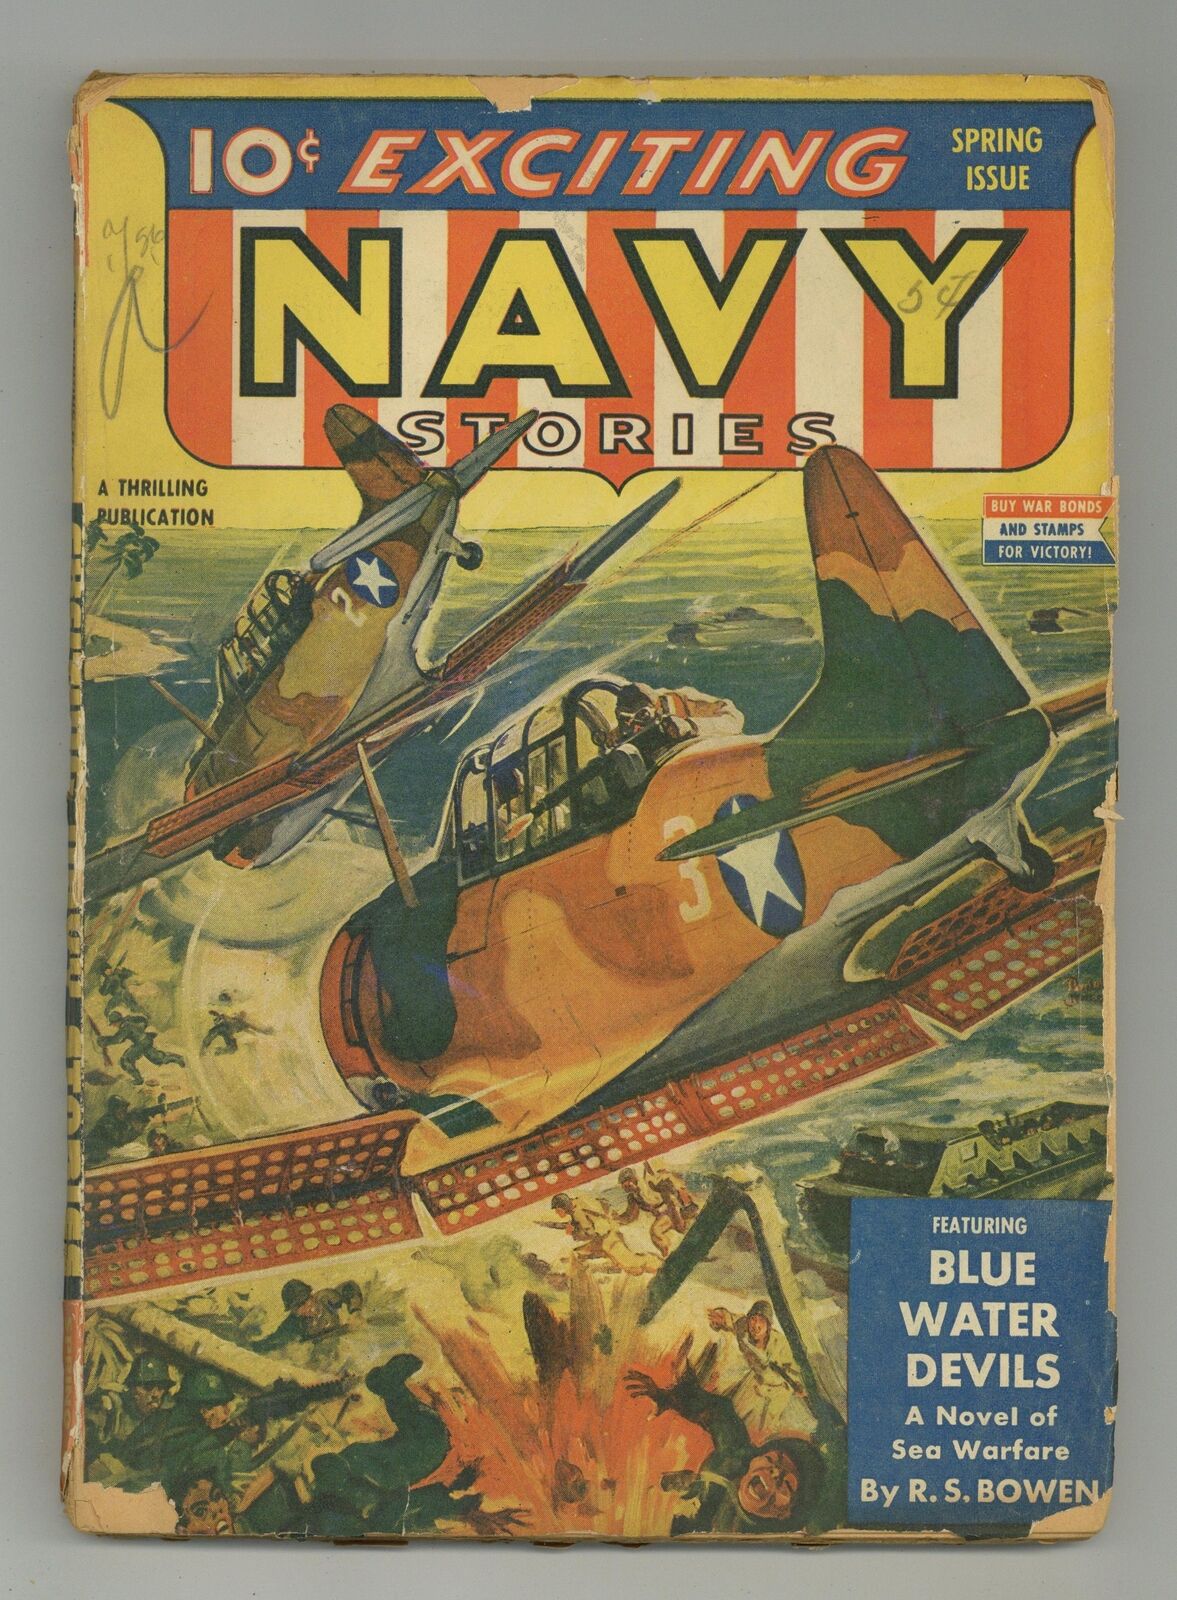 Exciting Navy Stories Pulp Mar 1943 Vol. 1 #3 GD 2.0